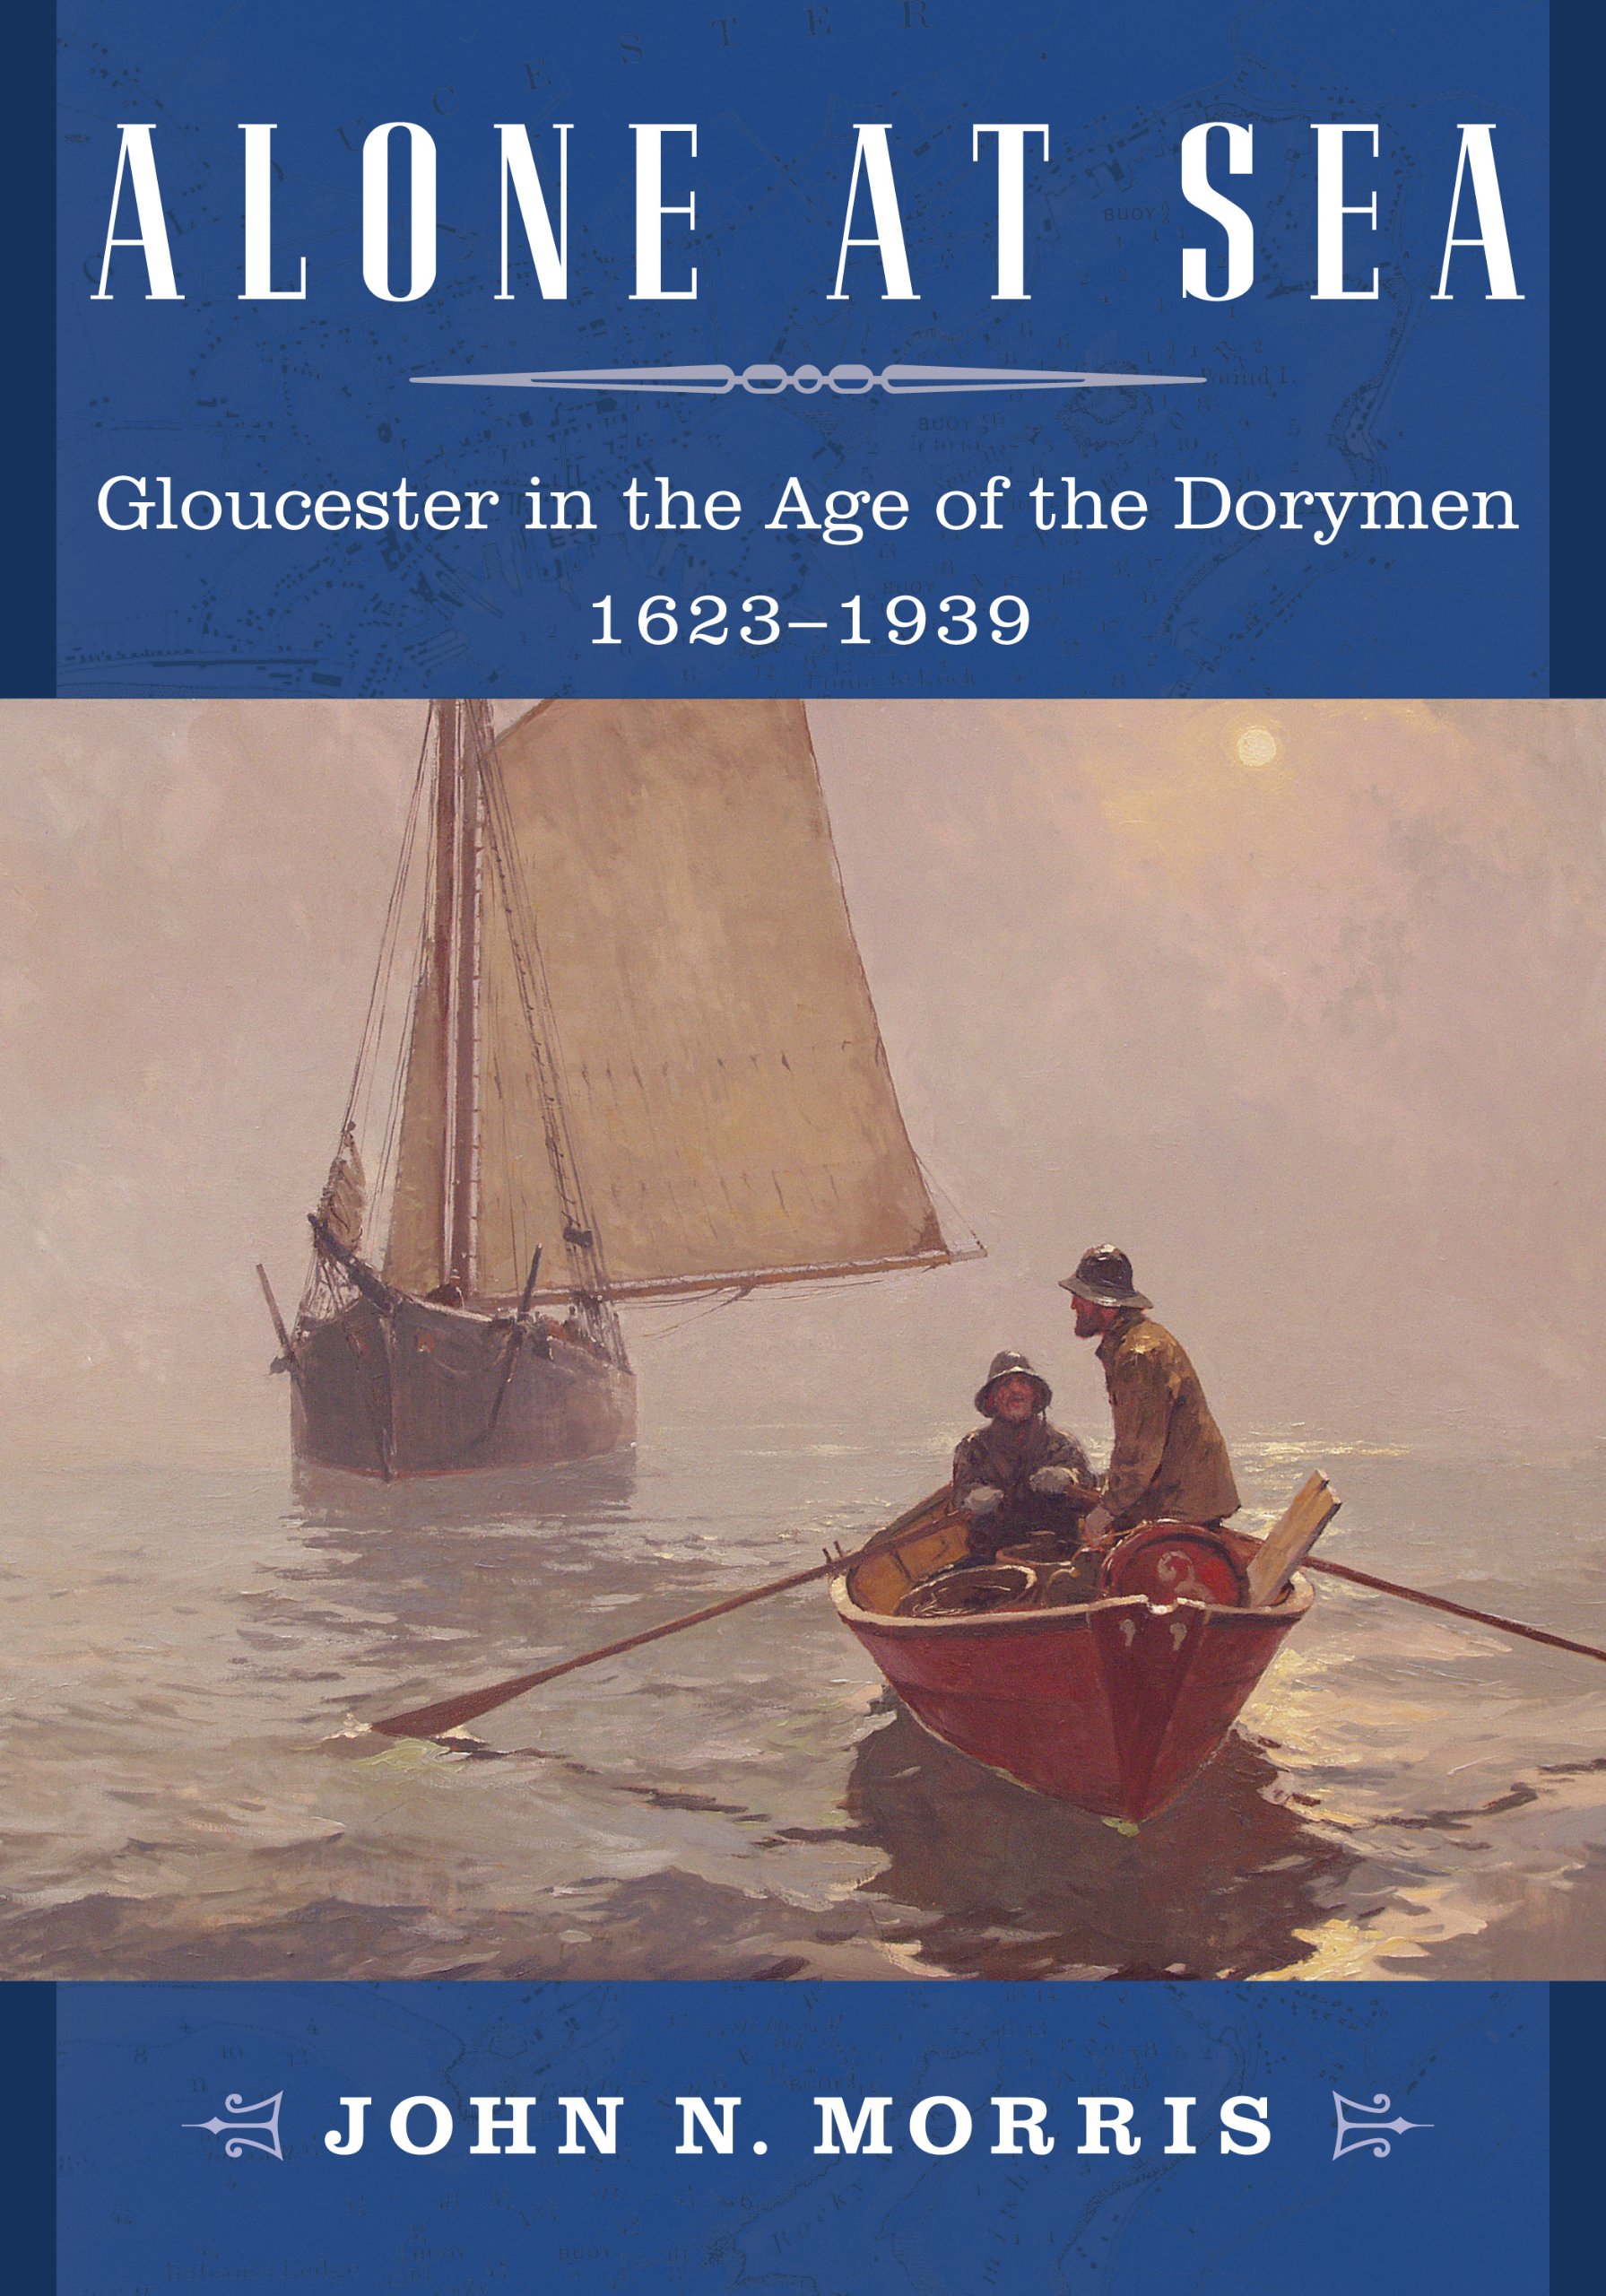 Alone At Sea: Gloucester in the Age of the Dorymen, by John N. Morris